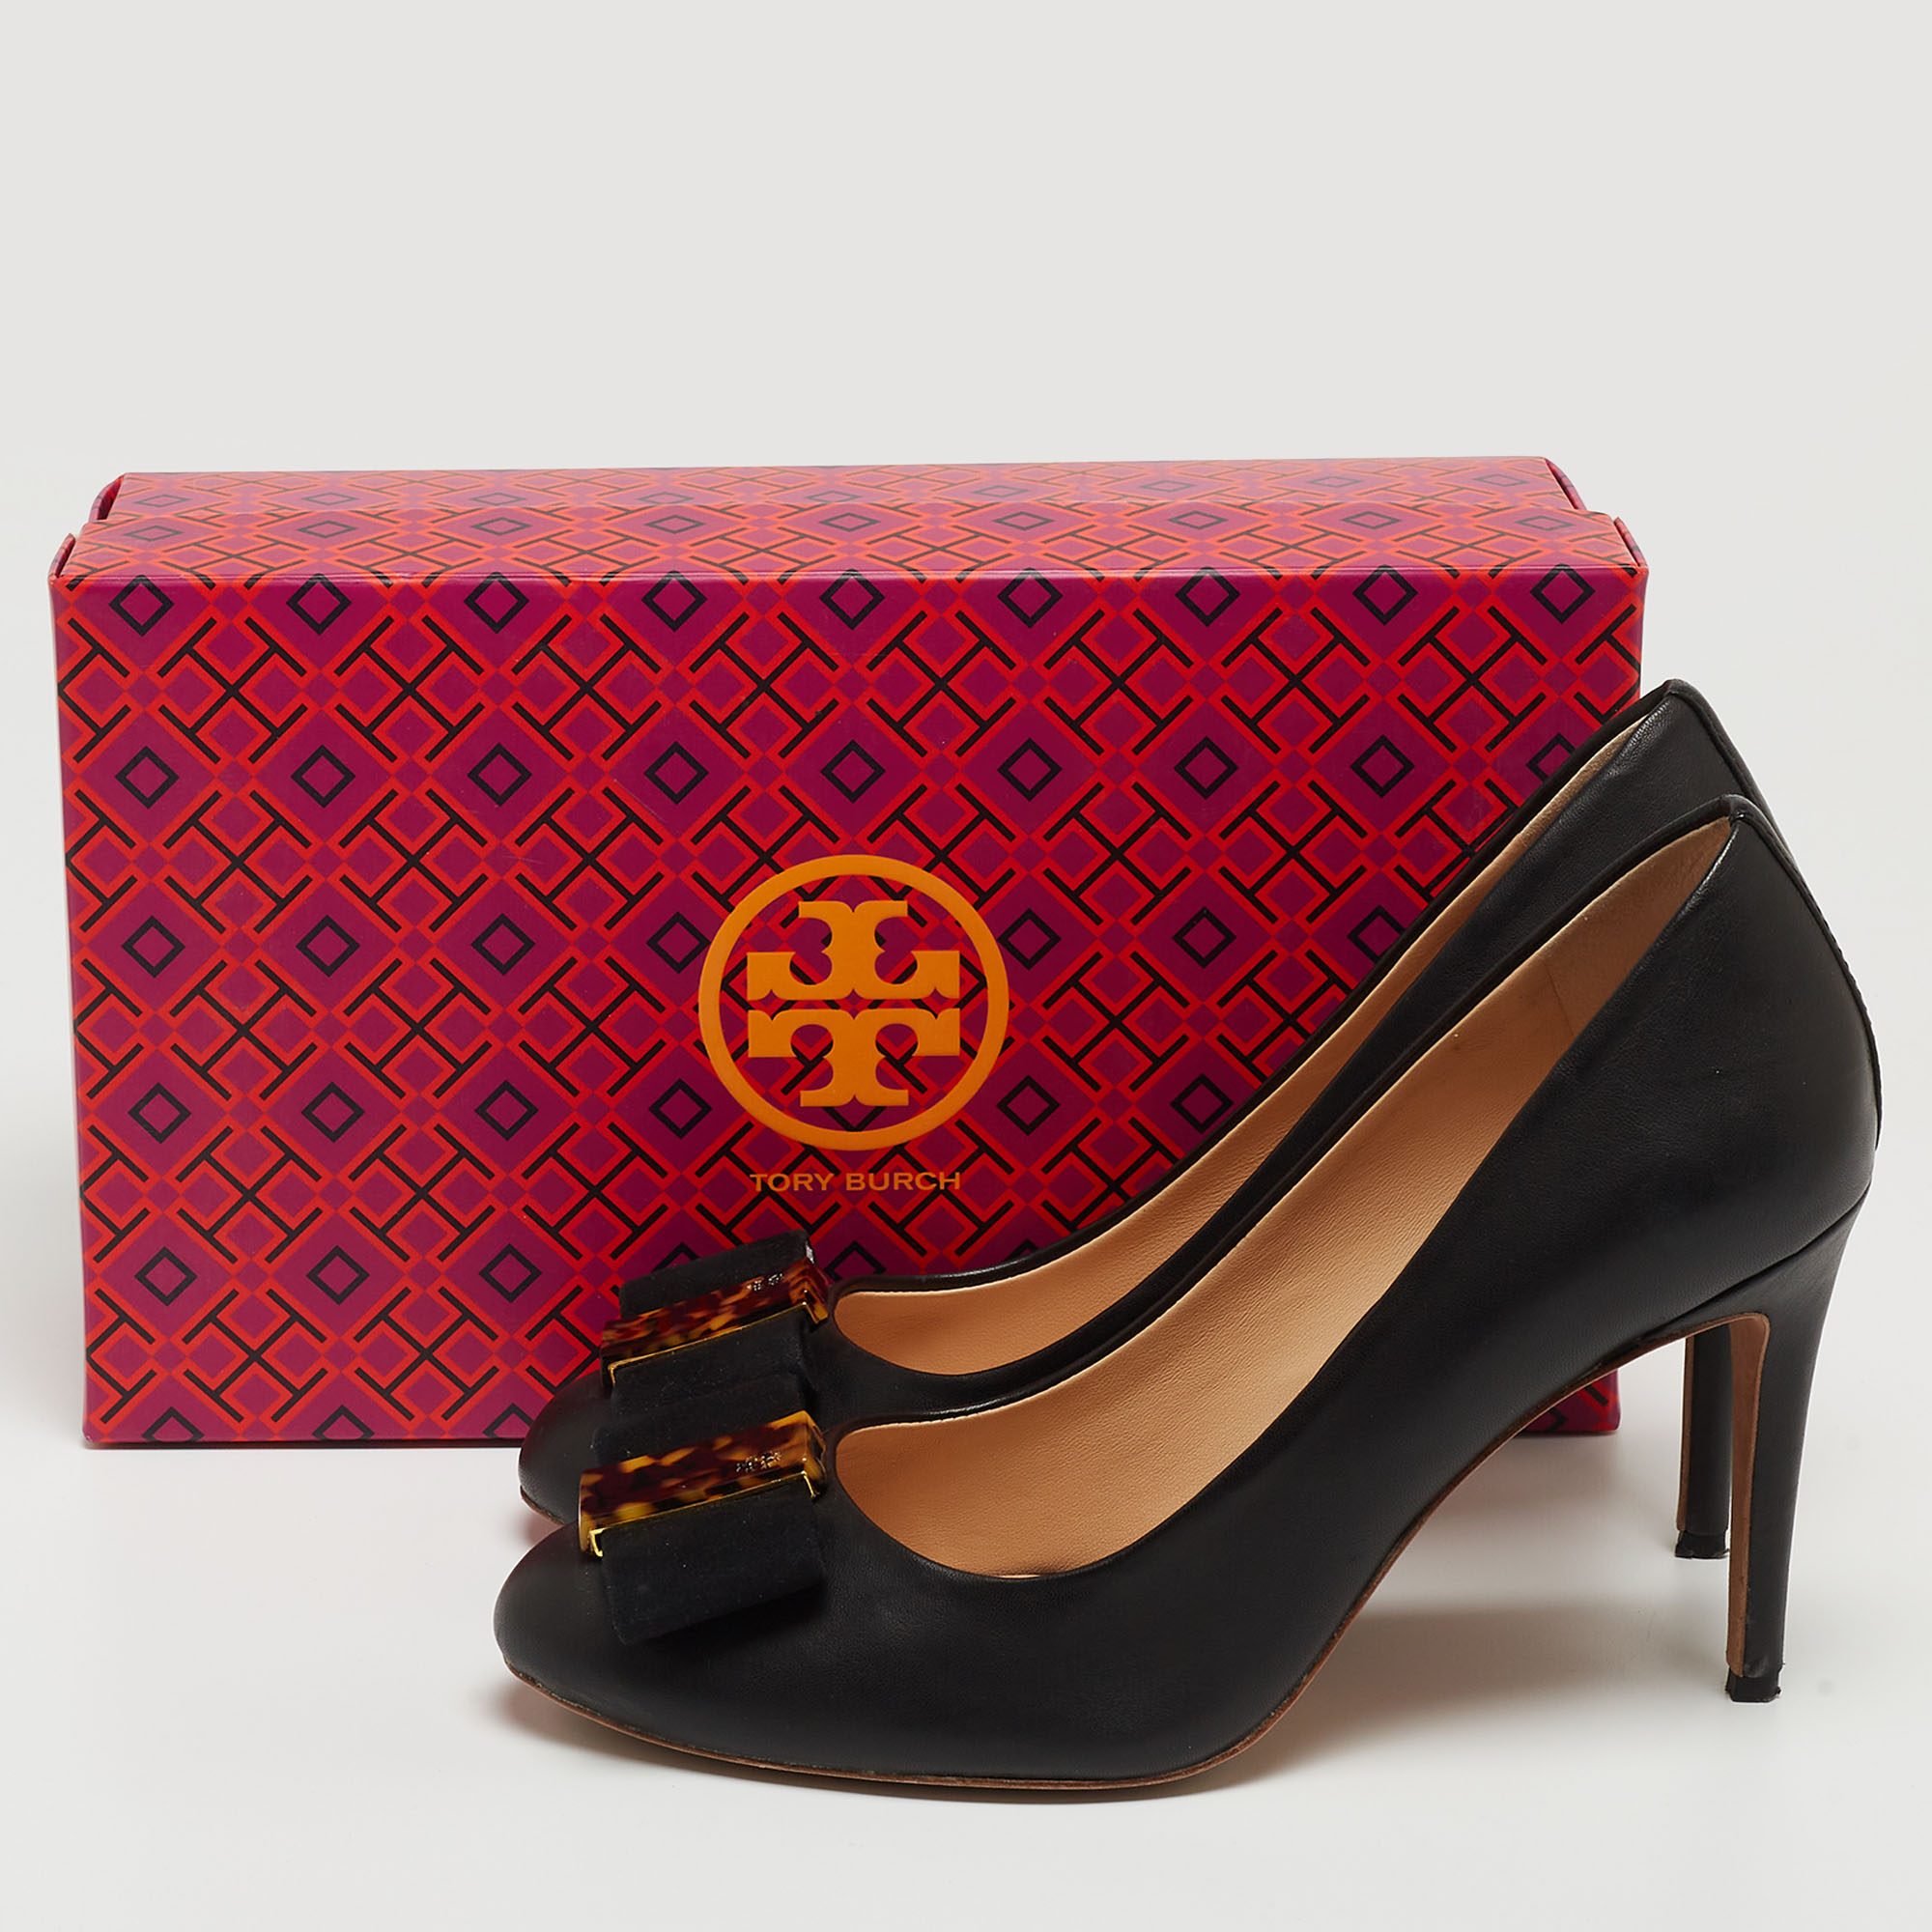 Tory Burch Black Leather And Suede Tortoise Bow Chase Pumps Size 40